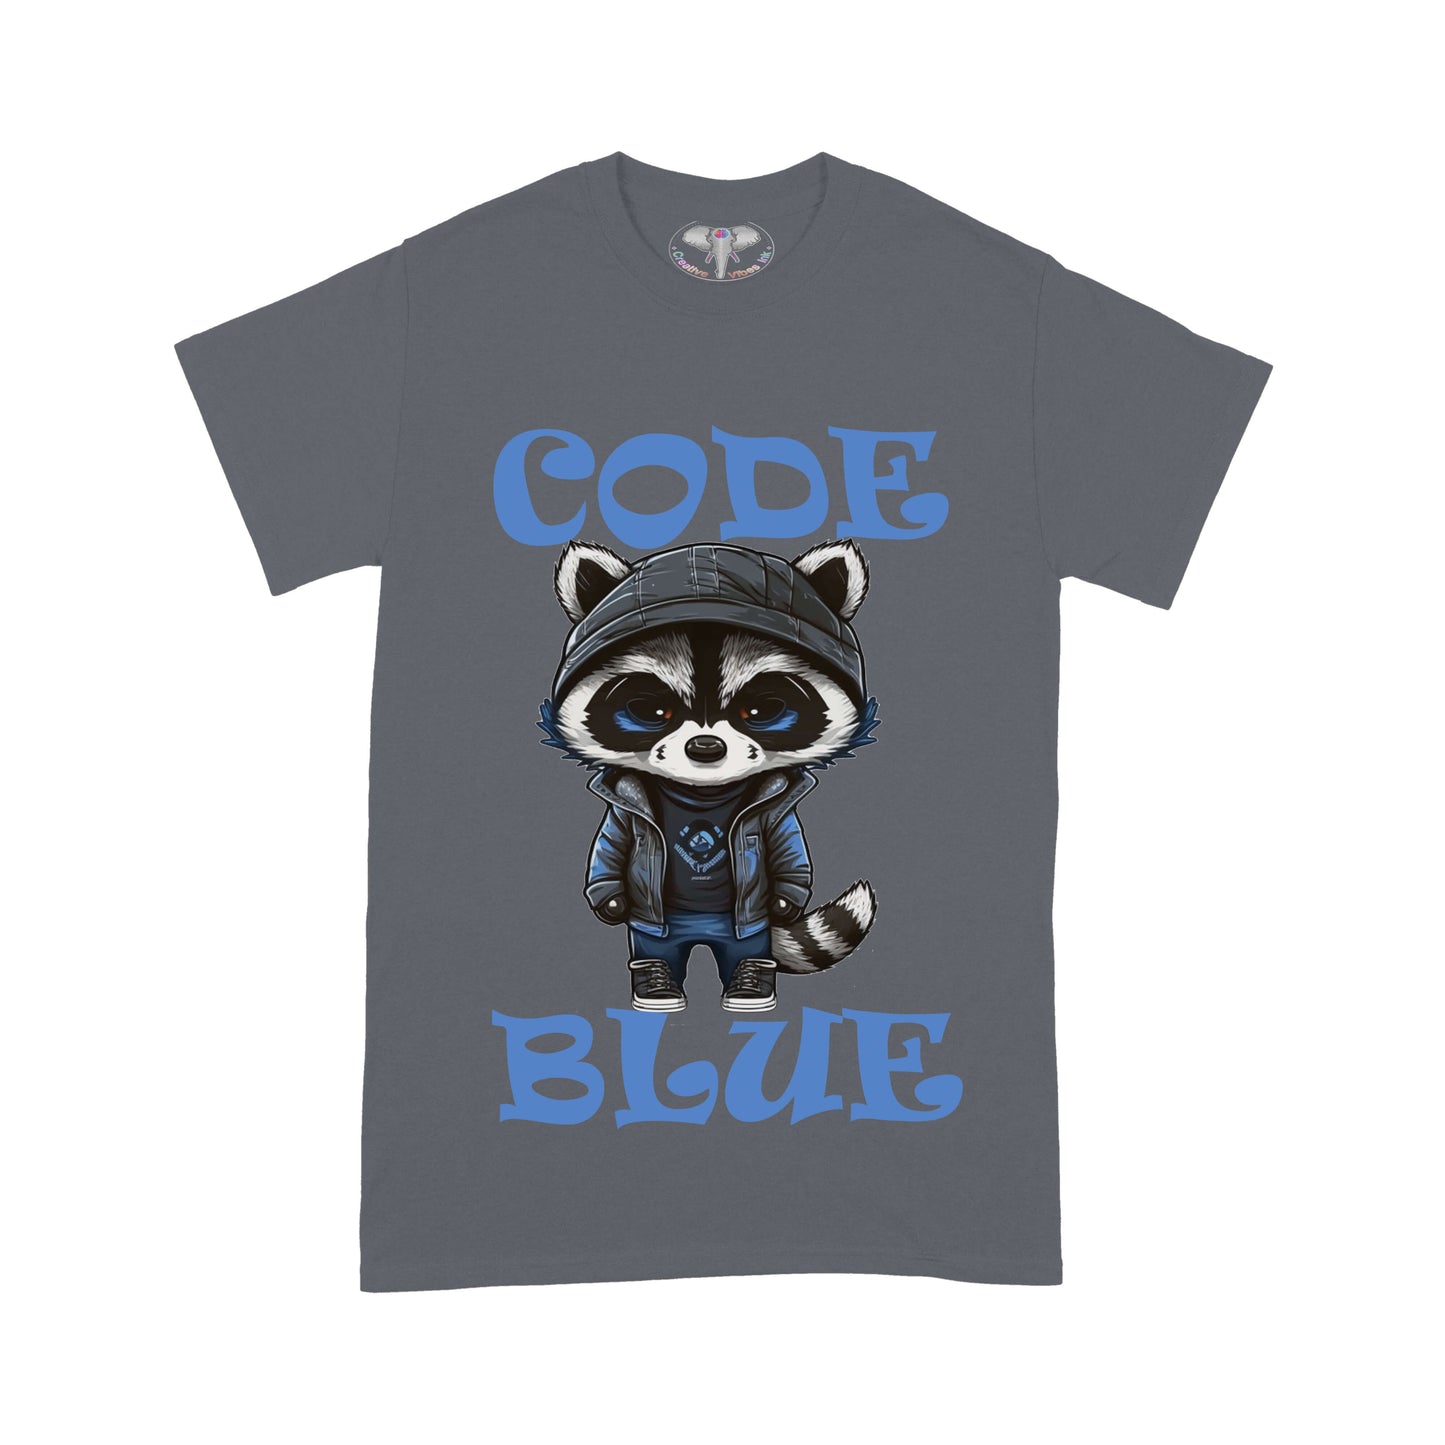 Racoon Code Blue Graphic T-shirt